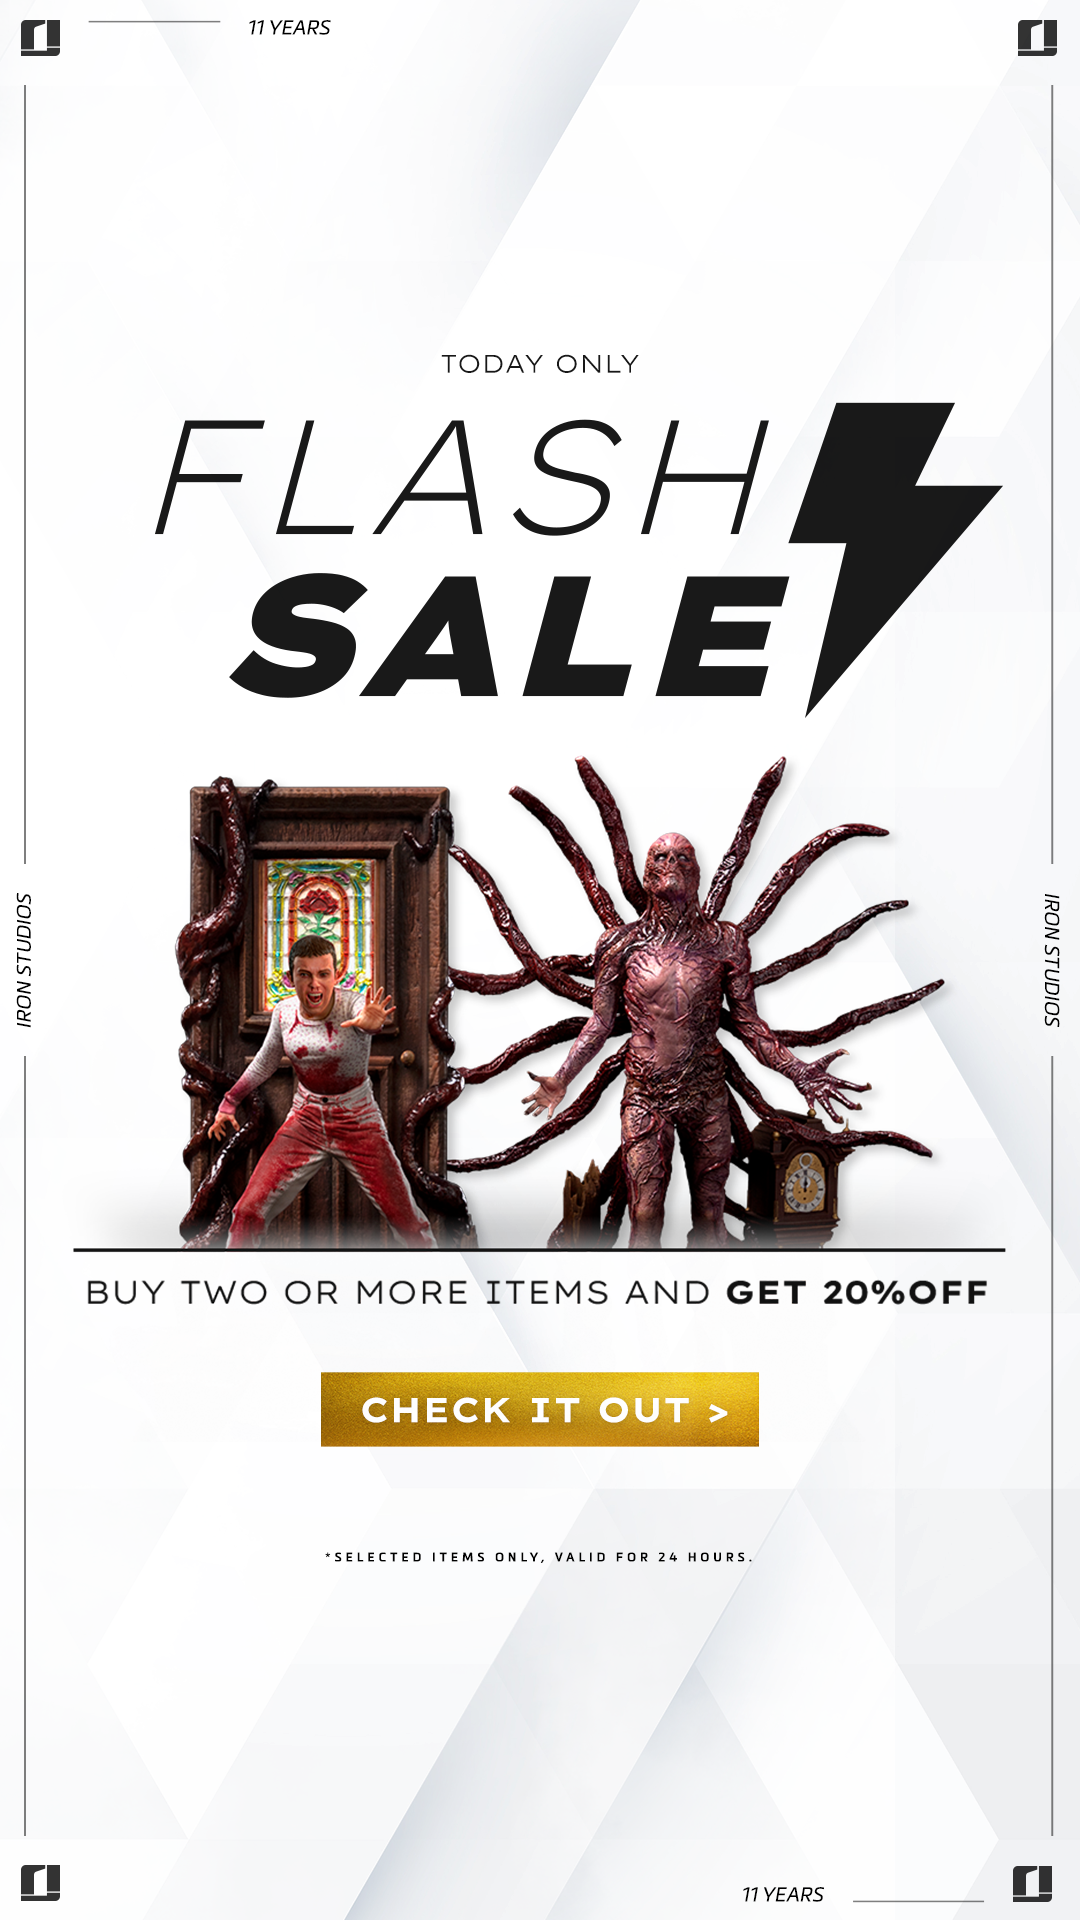 FLASH SALE - TODAY ONLY